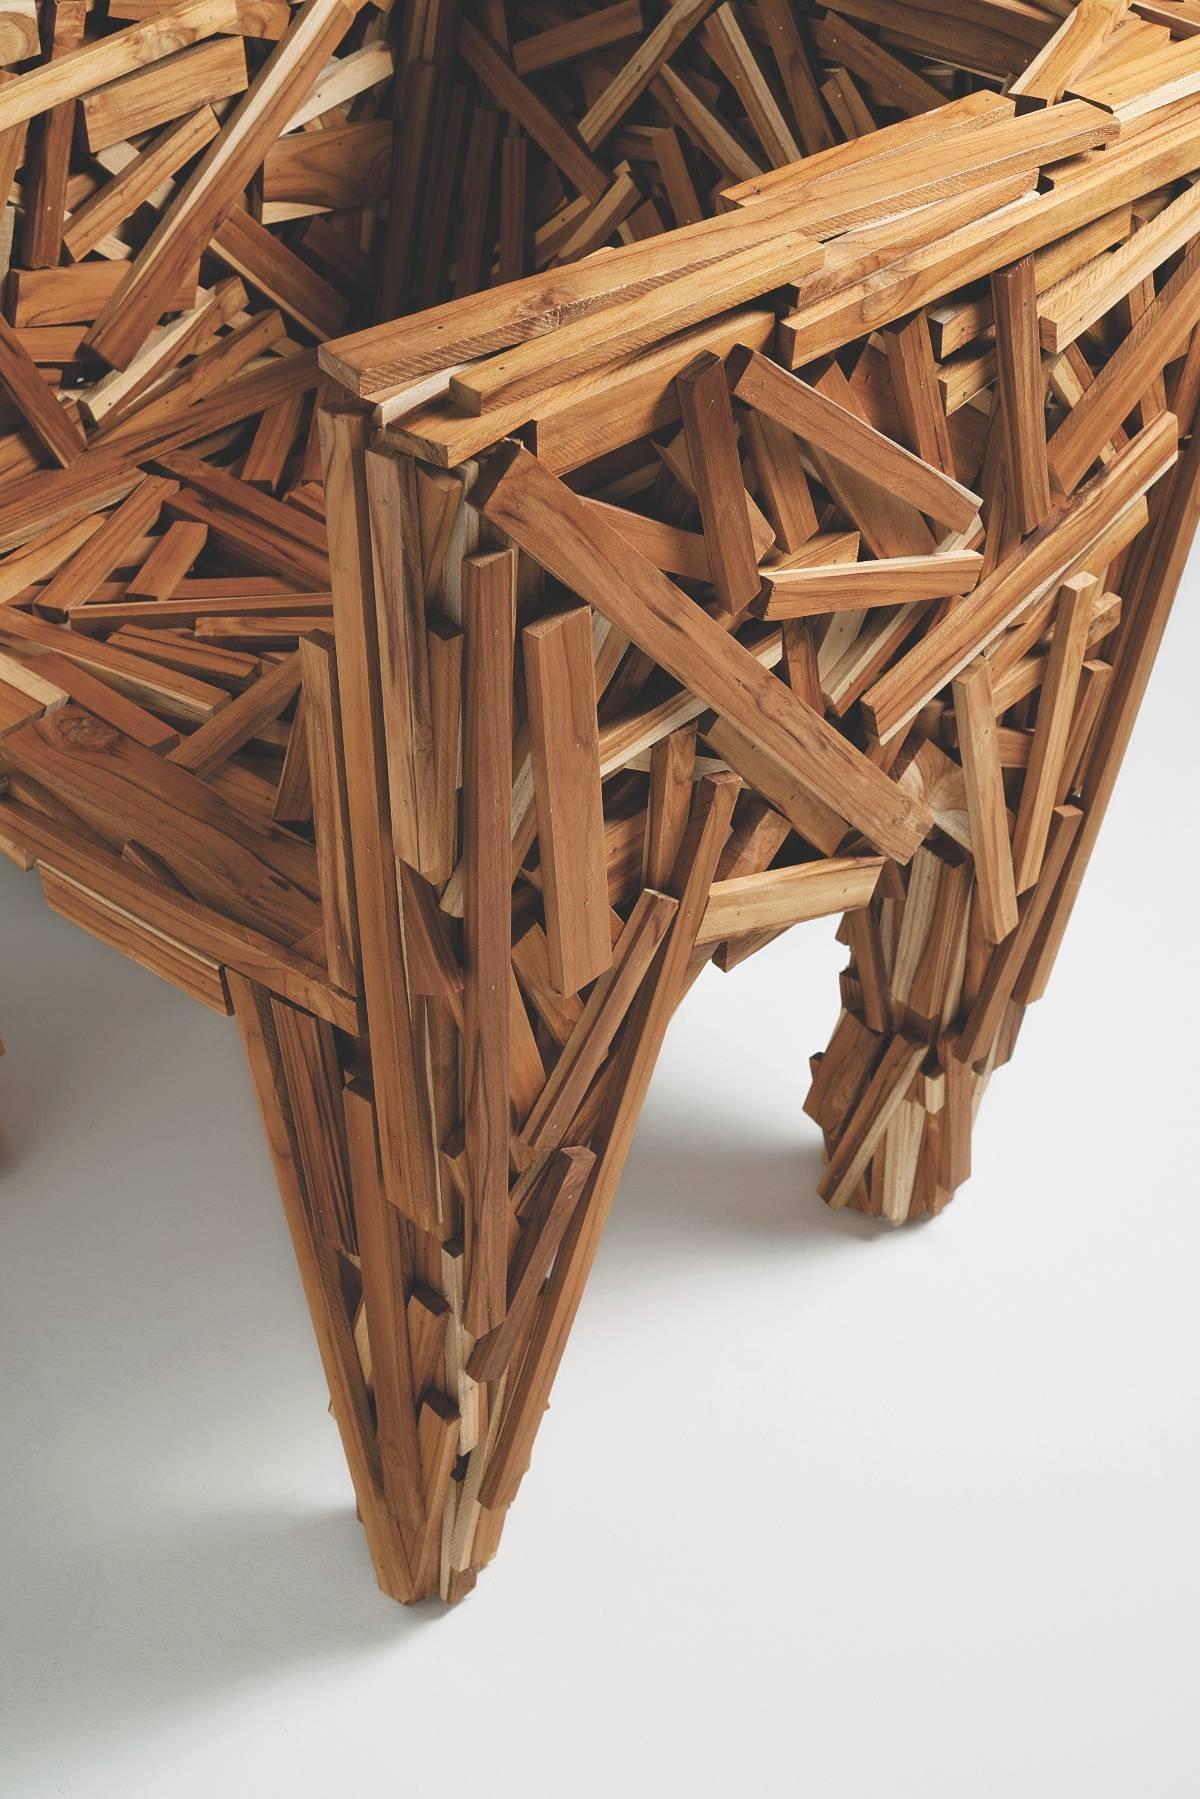 Armchair, Edra, Favela chair, Fernando and Humberto Campana, 2003.
Is a chair without internal structure, built with many pieces of natural wood, similar to the shacks of the favelas are built in Brazil, glued and nailed together by hand on each